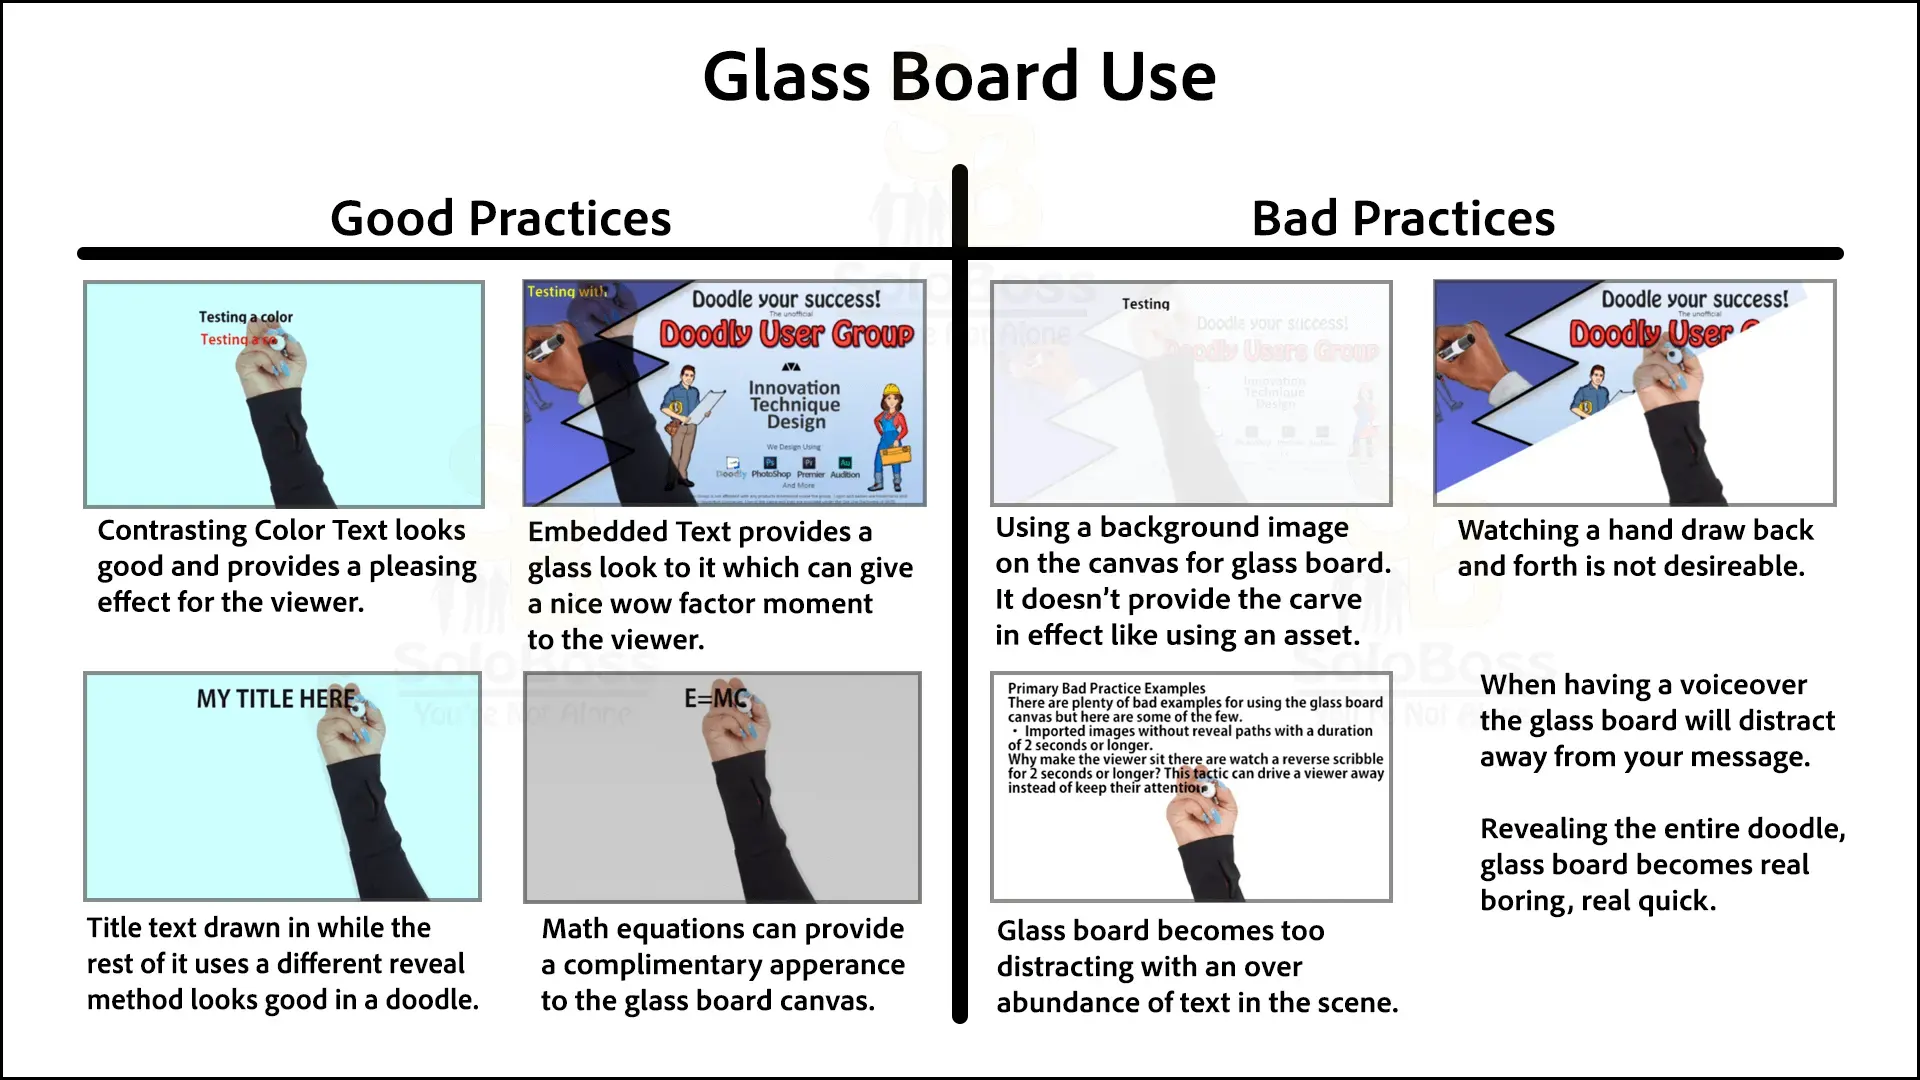 Showing good and bad practices using the glass board canvas in Doodly.